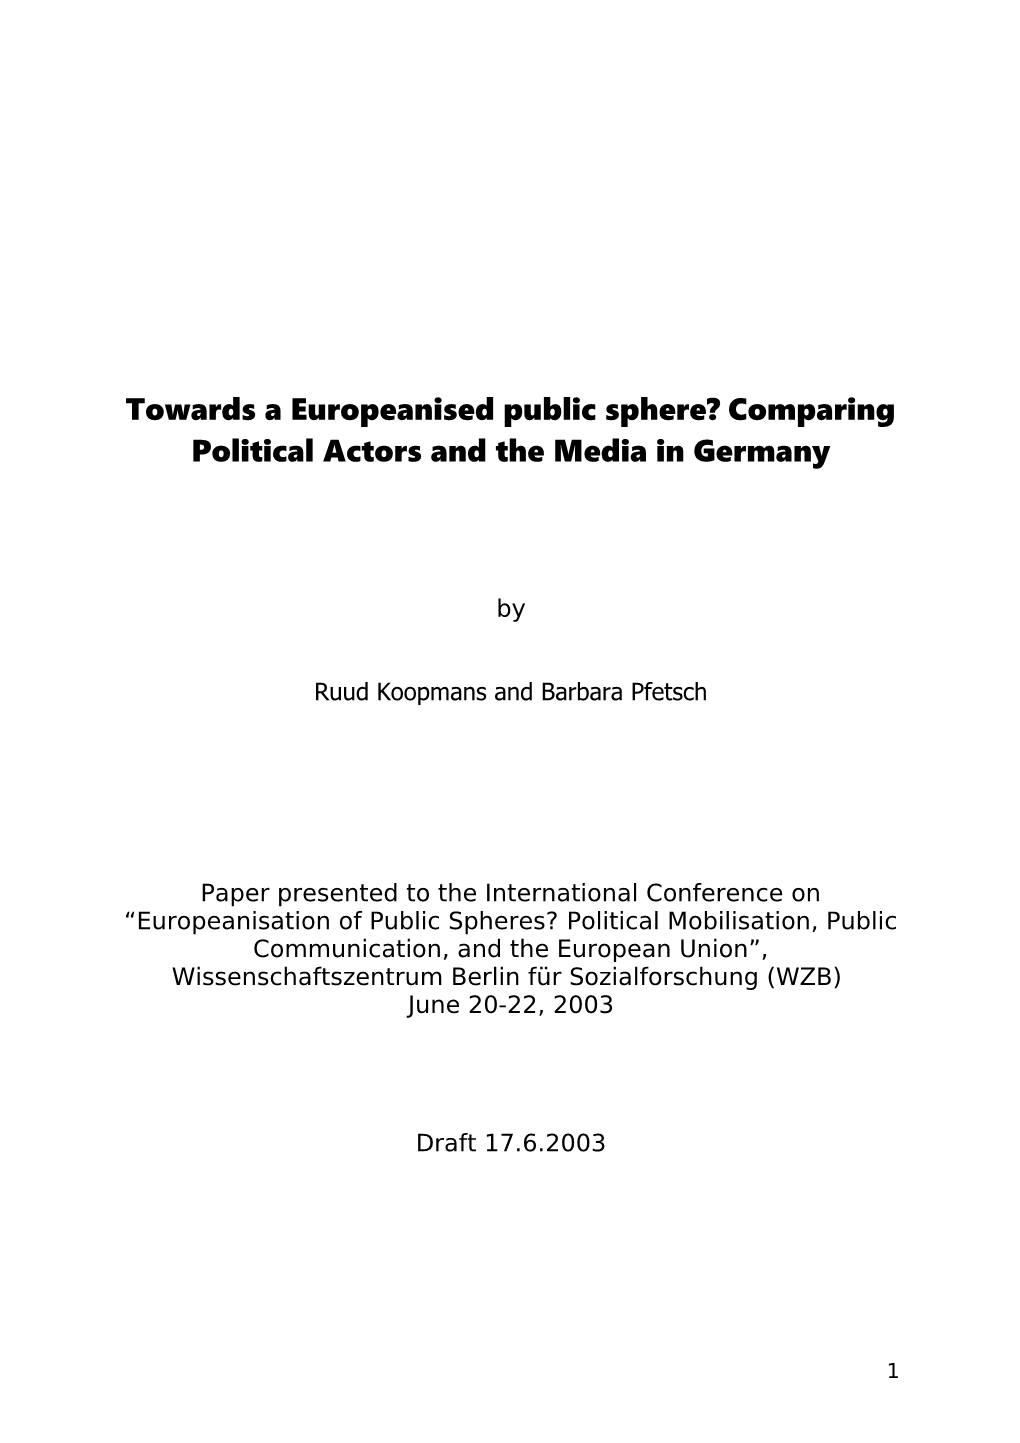 Towards a Europeanised Public Sphere? Comparing Political Actors and the Media in Germany